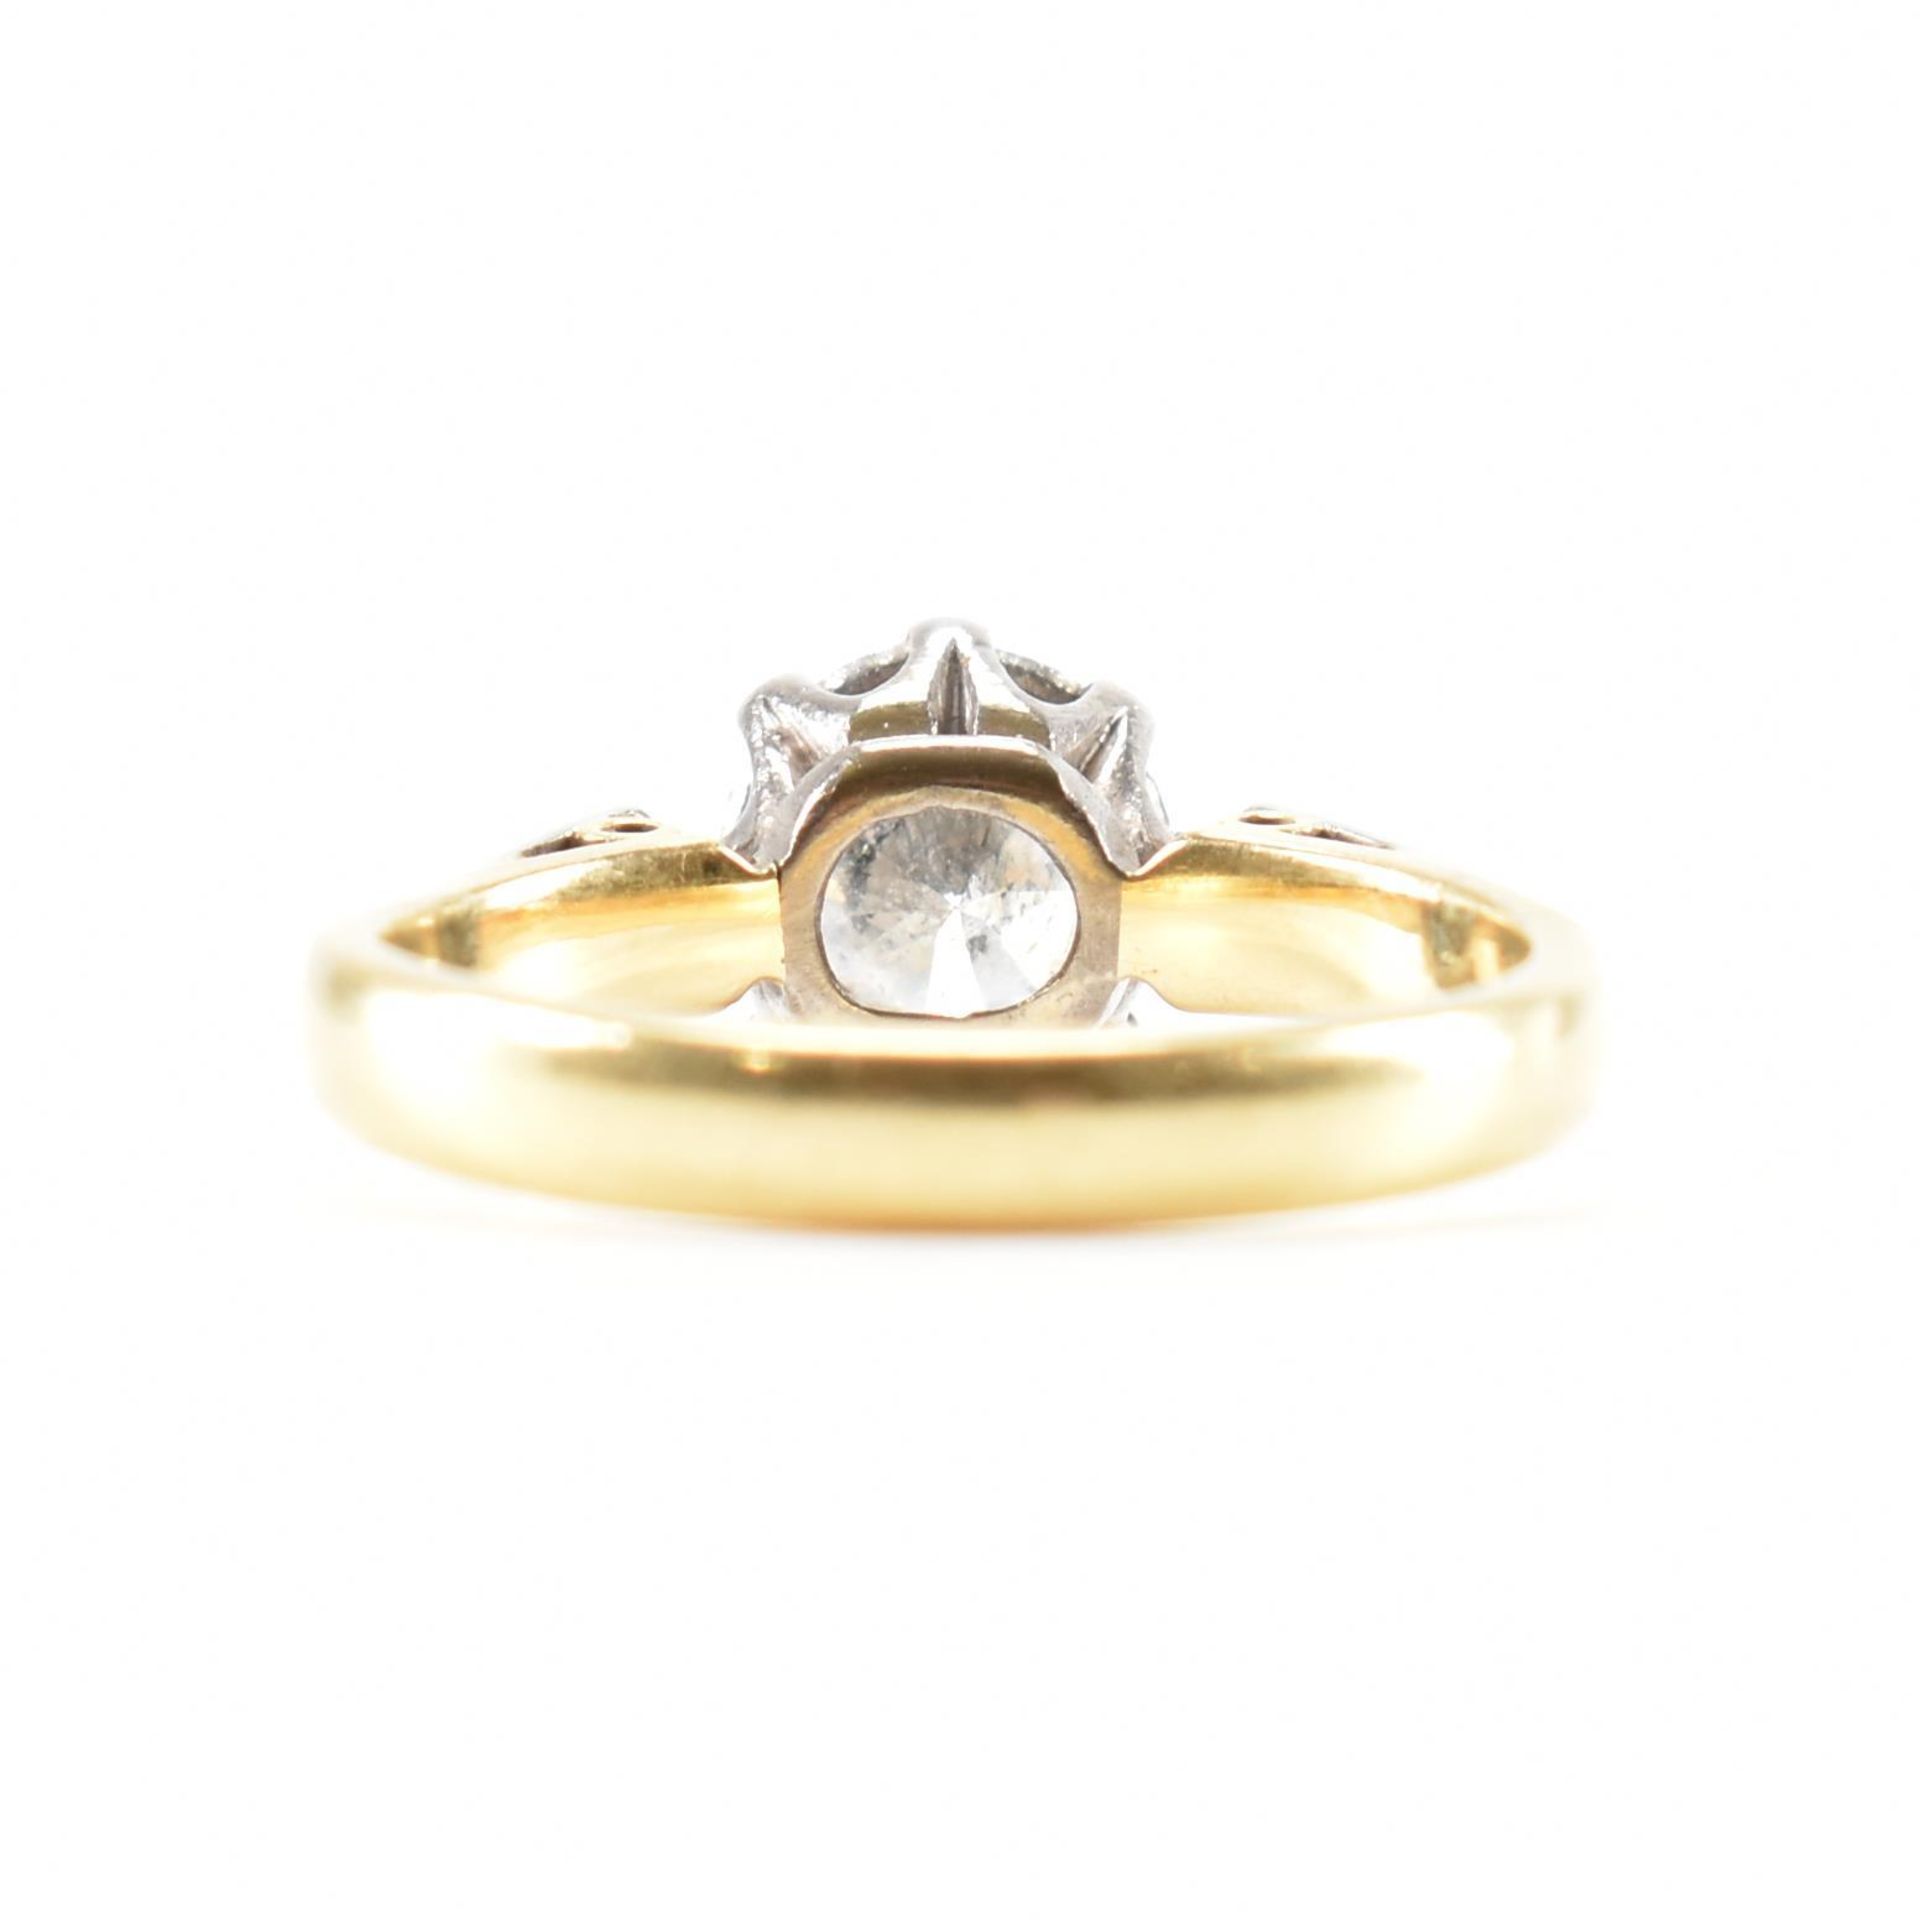 VINTAGE 18CT GOLD & DIAMOND SOLITAIRE RING - Image 4 of 8